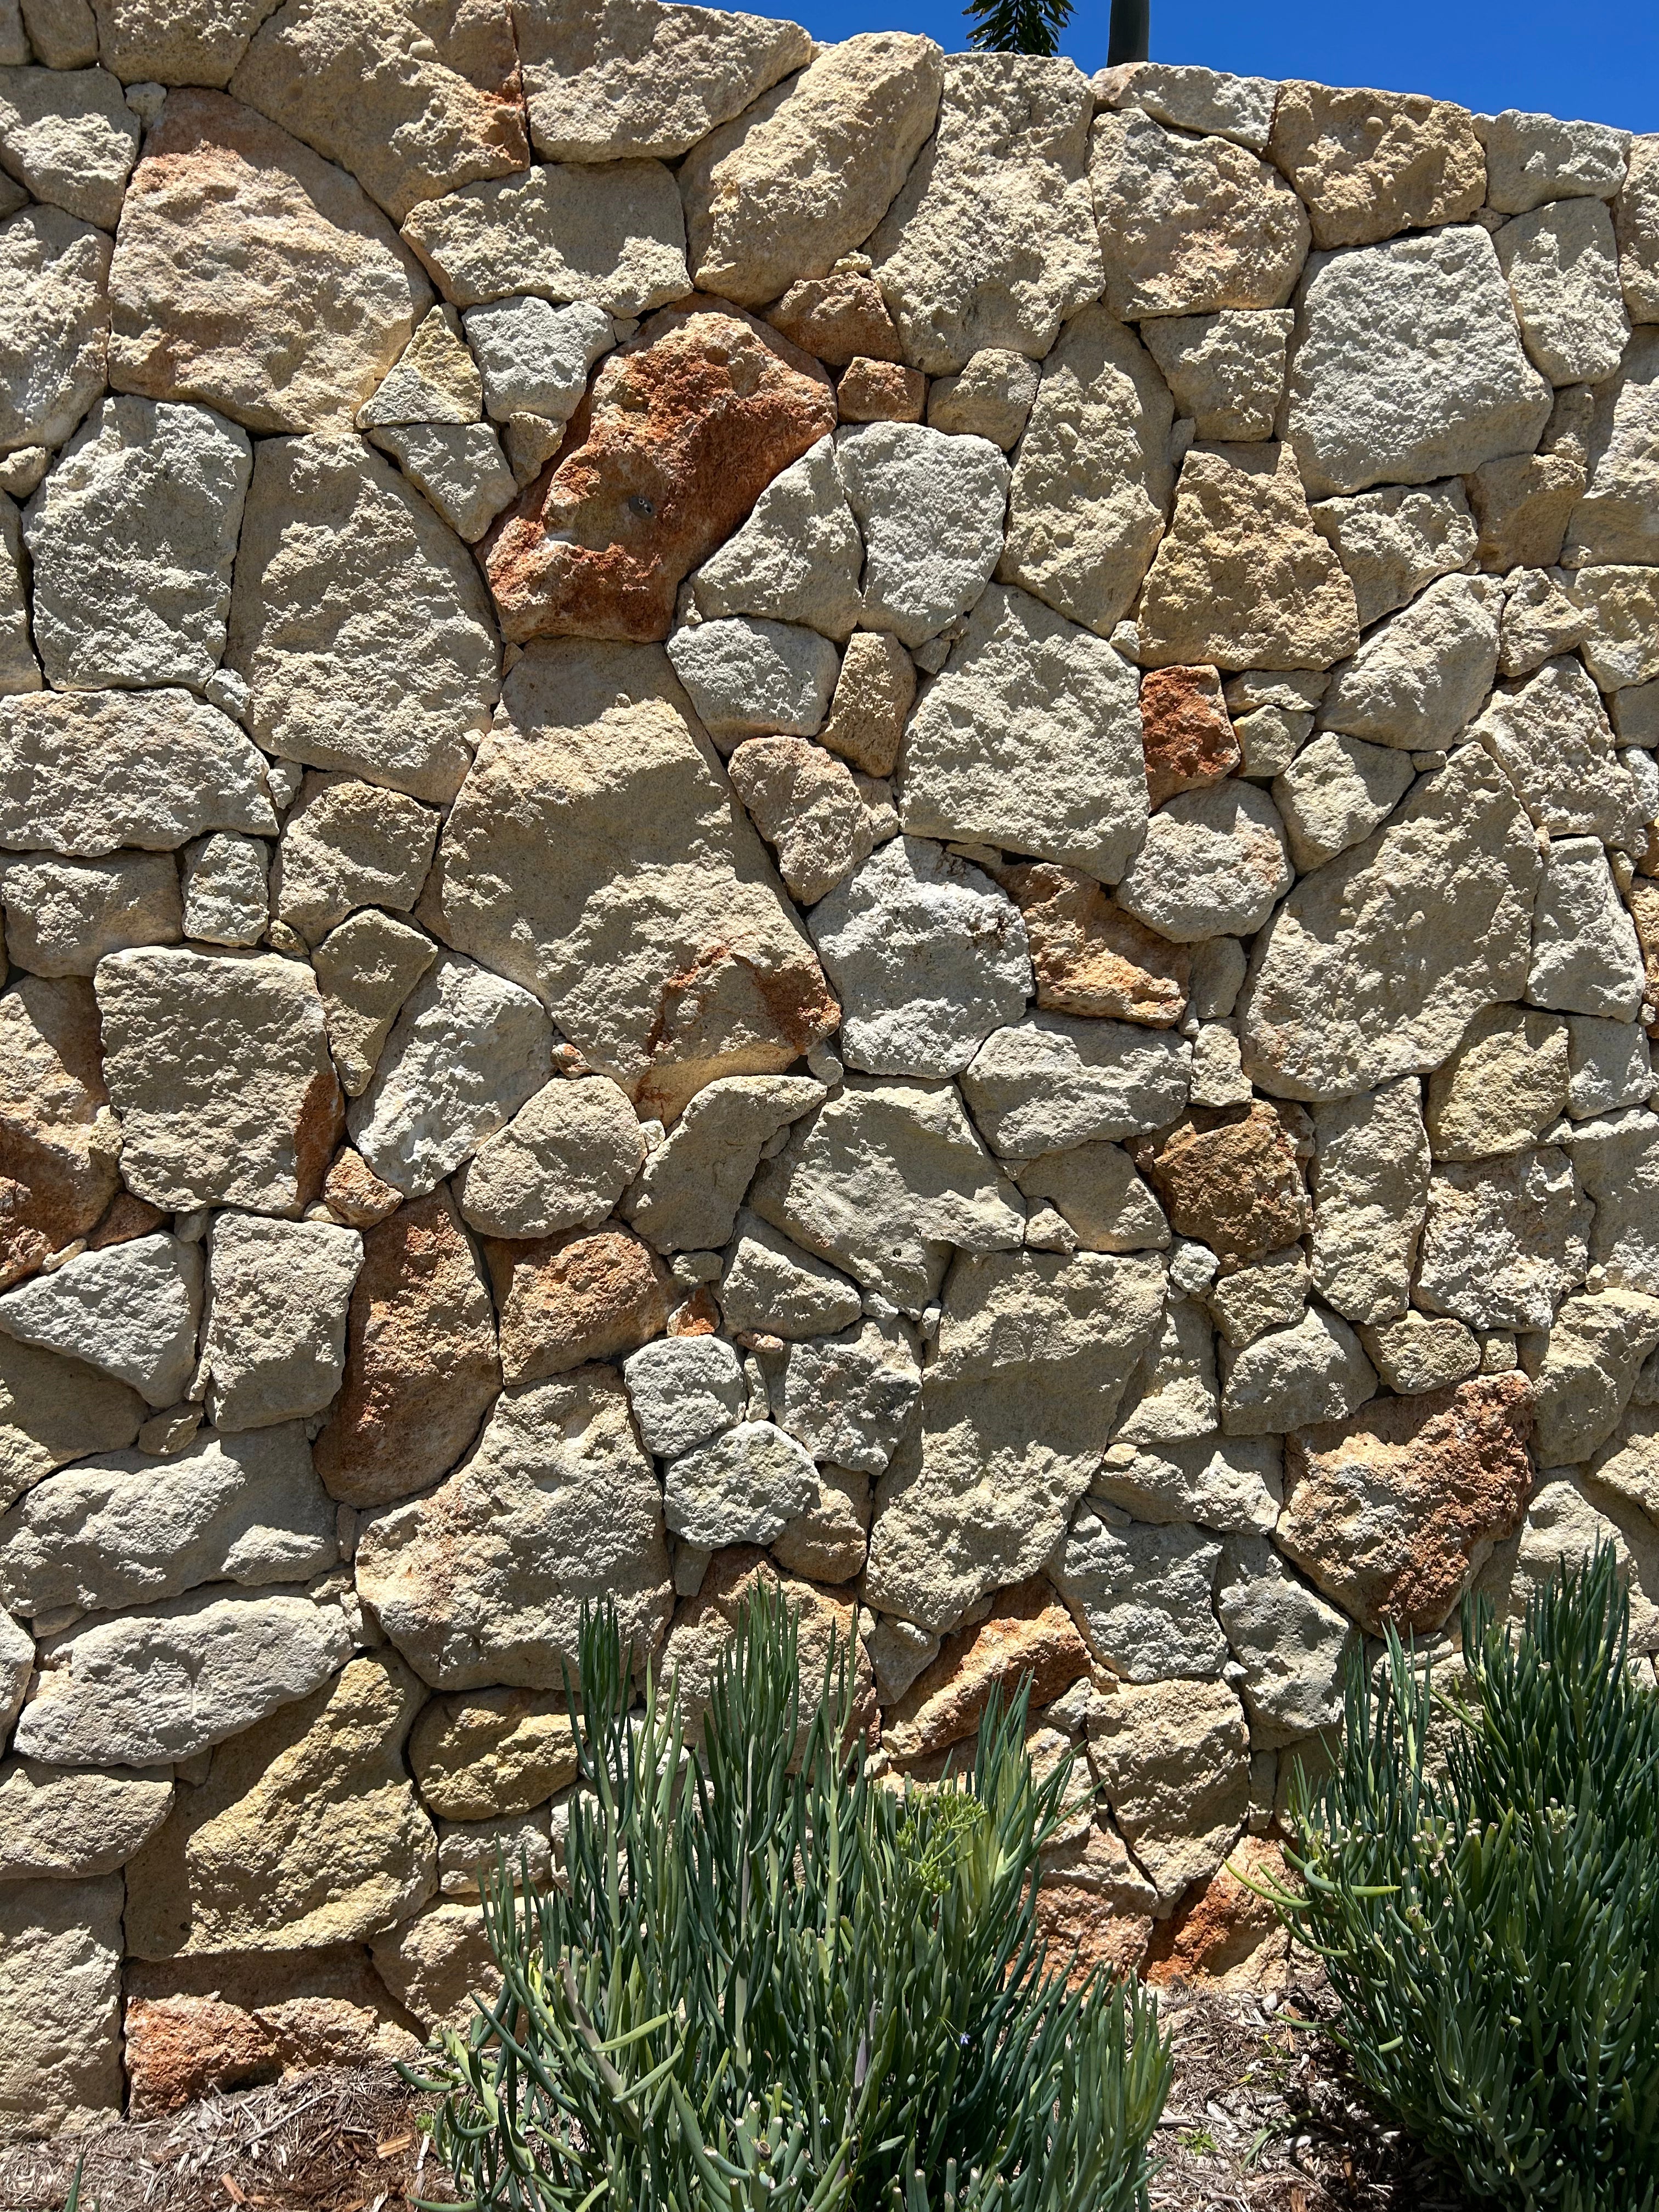 European Stone Wall Cladding Free Form Loose Stone - Kafe - PRE ORDER PRODUCT TO BE DELIVERED BY 2024